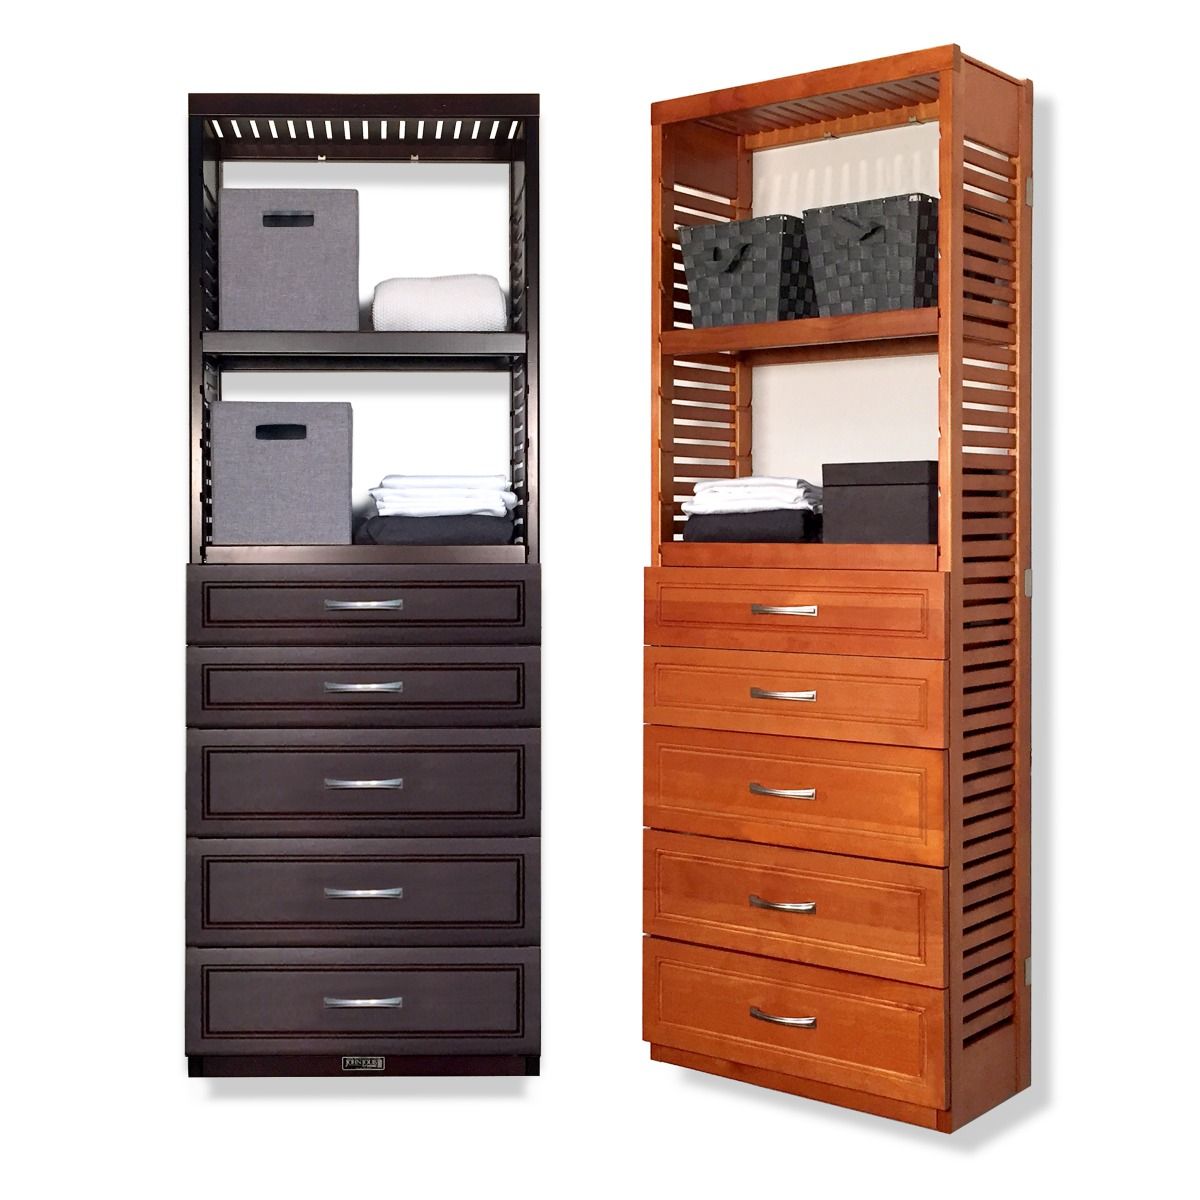 12in. Deep Woodcrest 6ft. Tower with drawers | John Louis Home